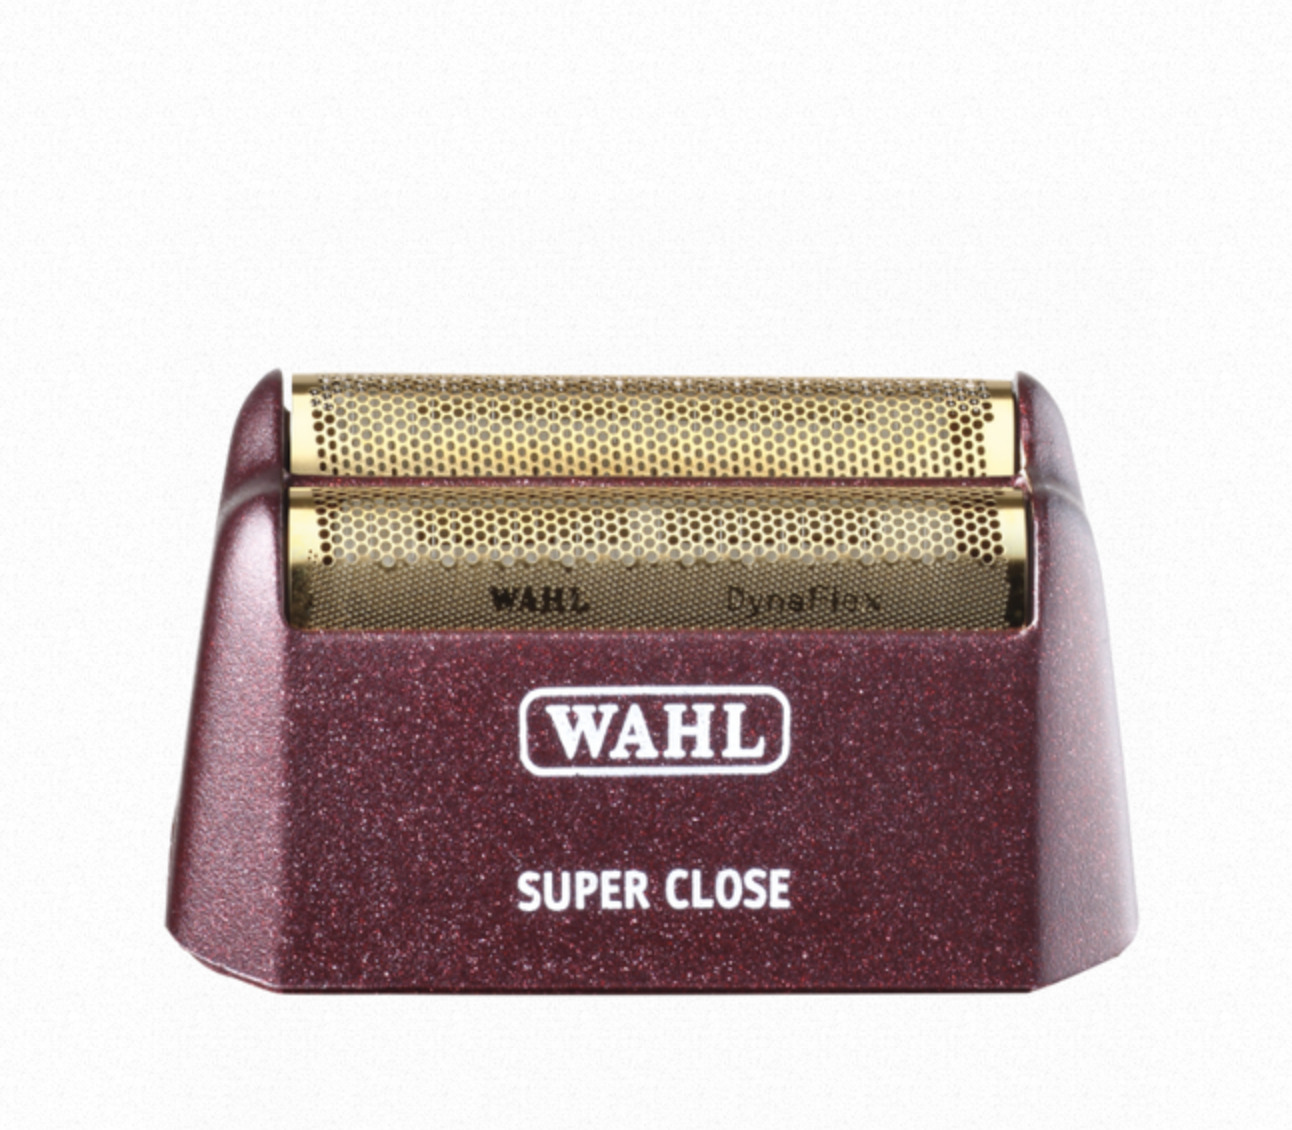 Wahl 5 star Shaver Replacement Foil - Red with Gold Foil